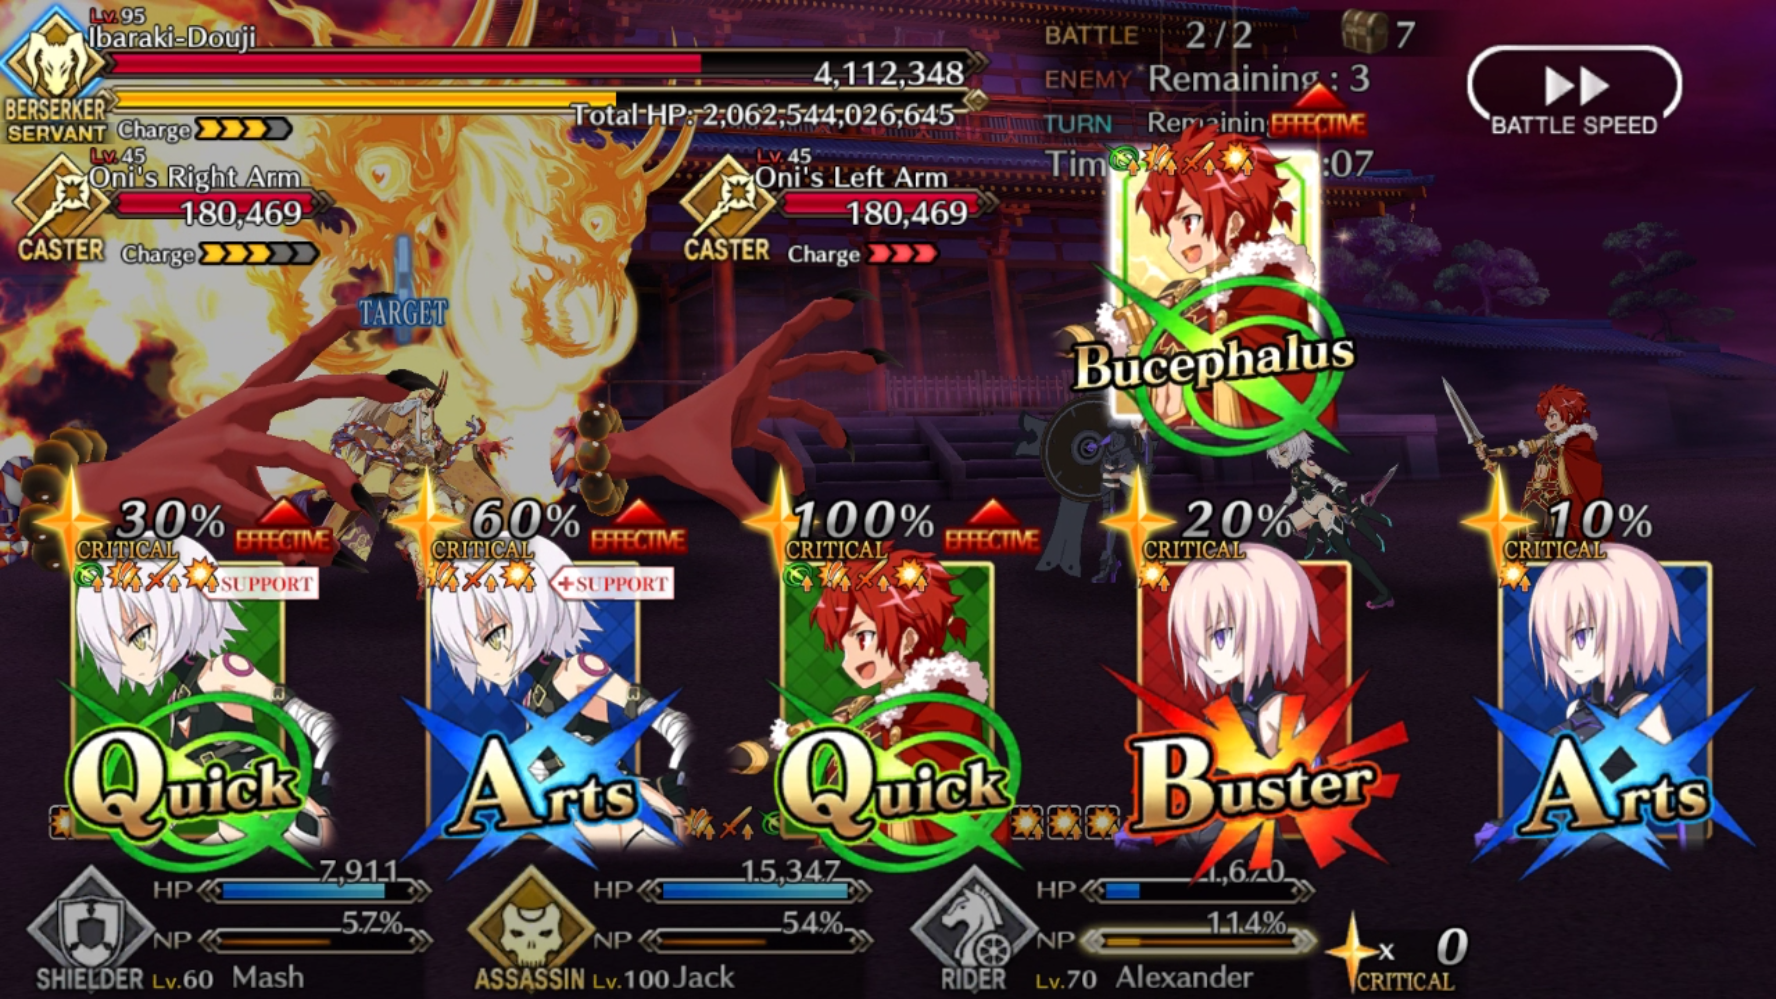 Alexander is about to unleash his Noble Phantasm at the right moment